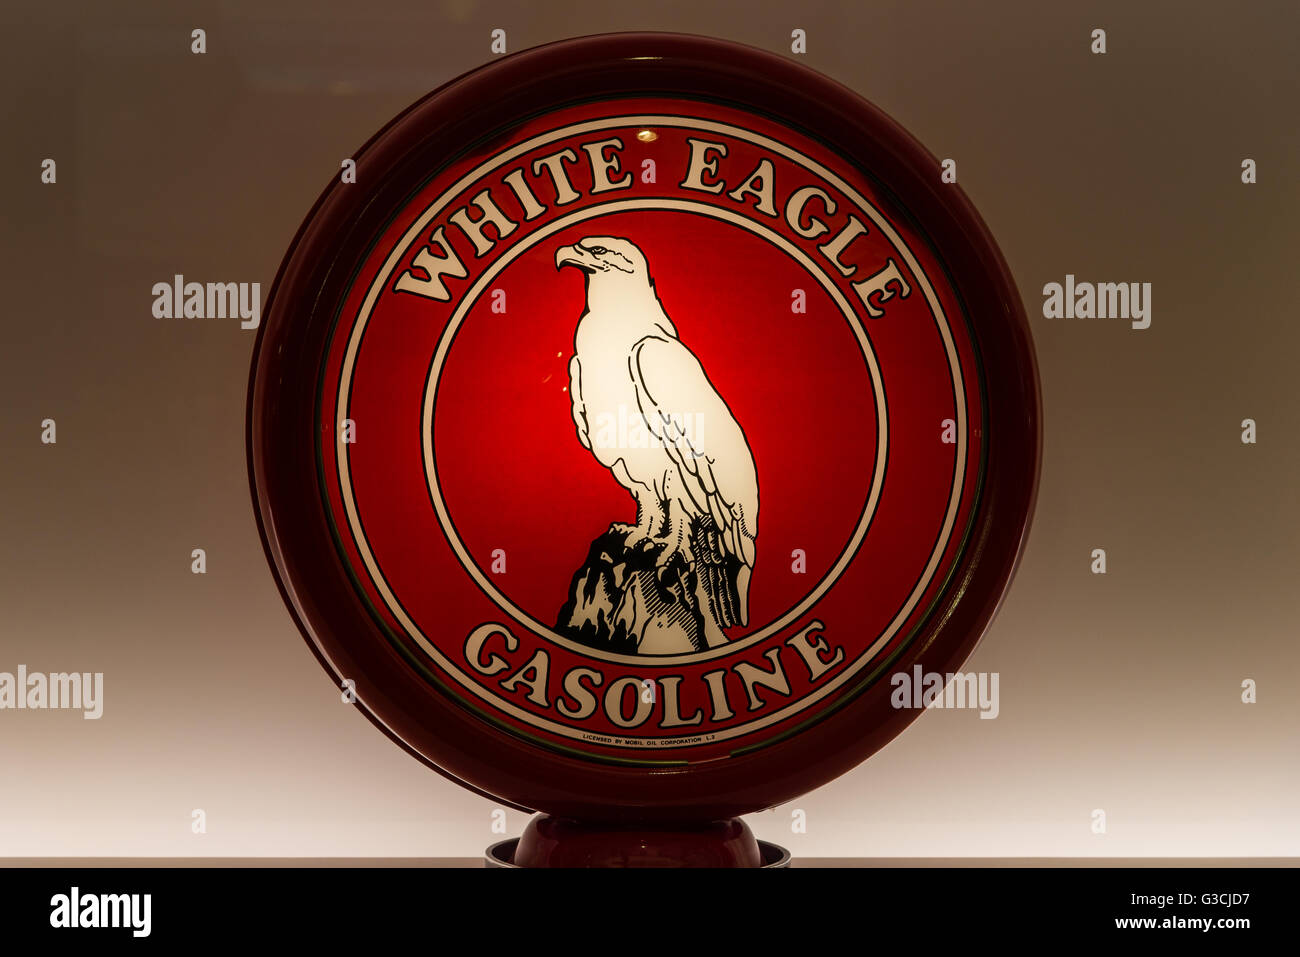 Glass globe for vintage White Eagle Gasoline gas pump in display. Stock Photo